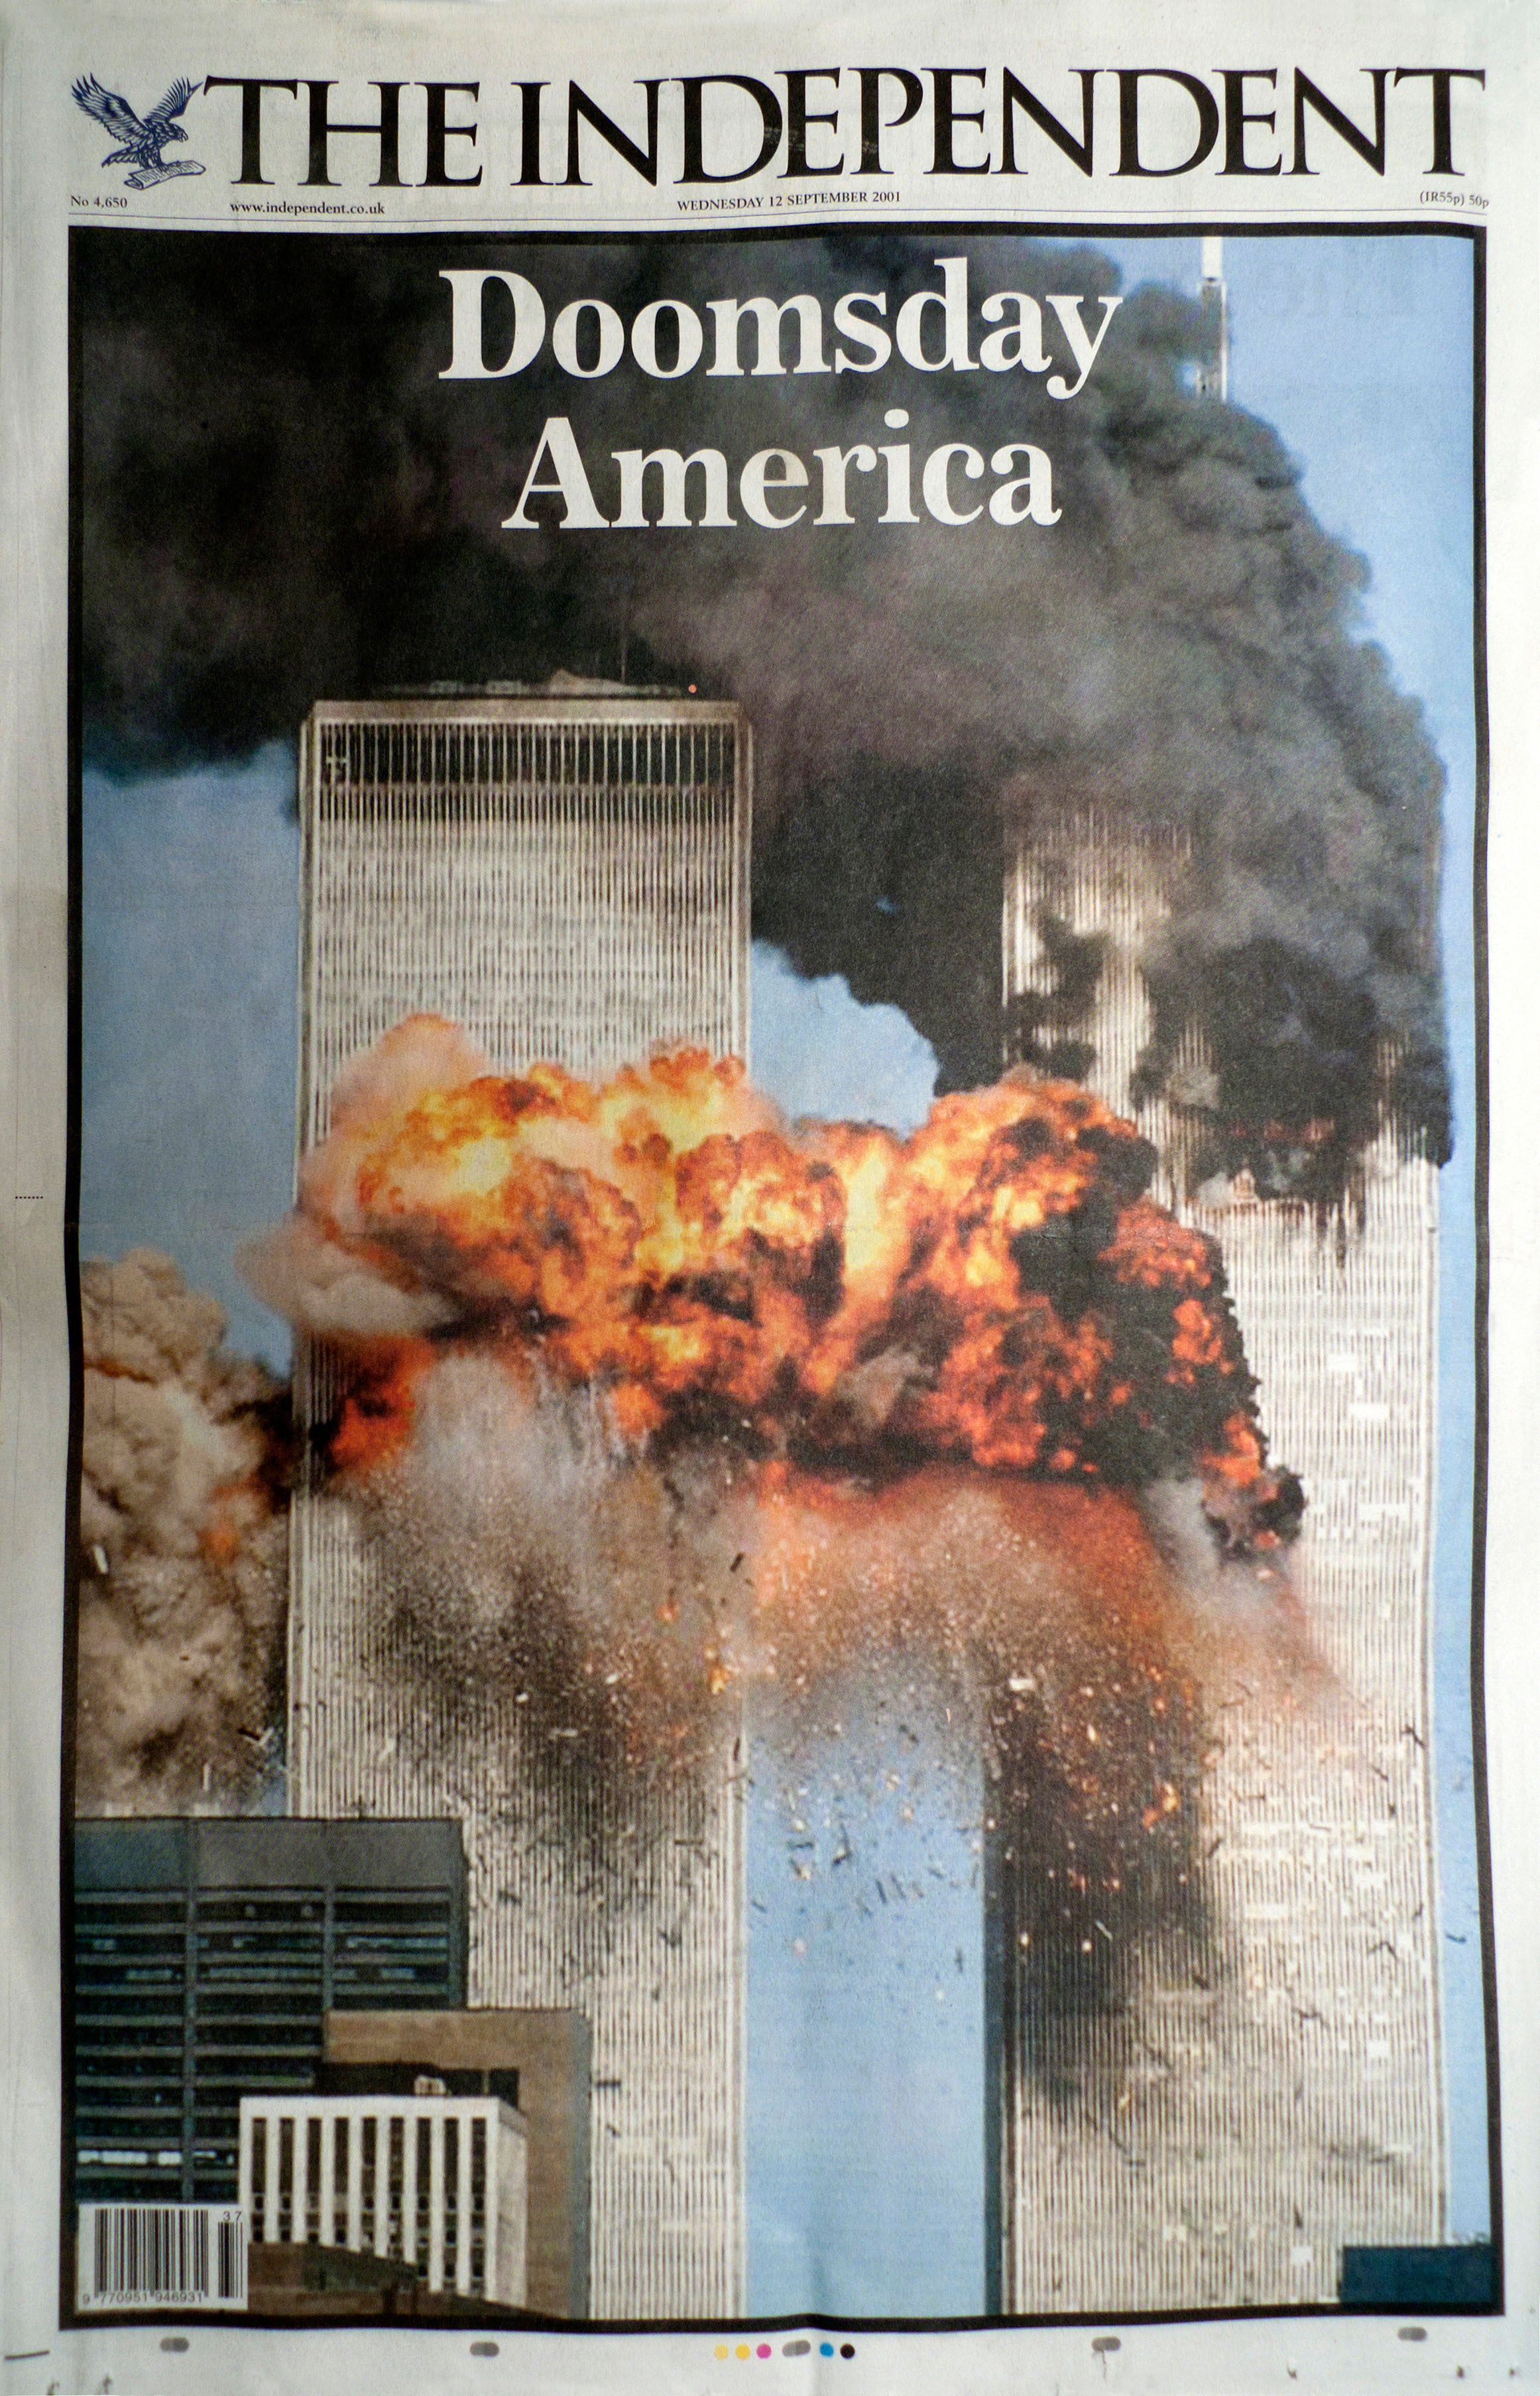 The Independent’s front page on 12 September, 2001